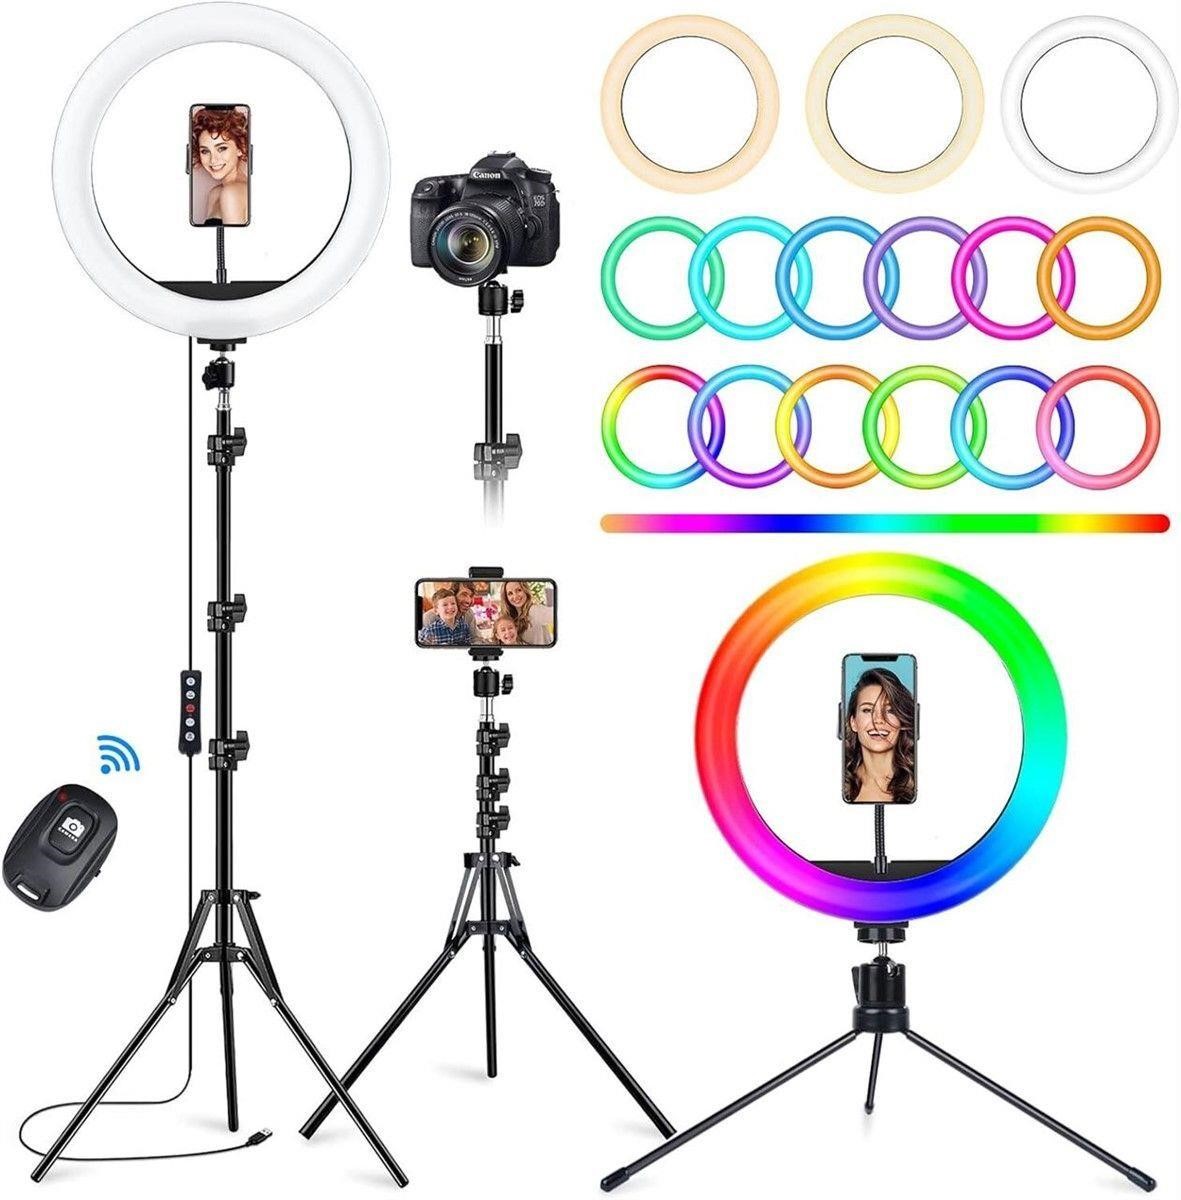 $36 10.2 Ring Light 75 Stand 12 Dimming Levels